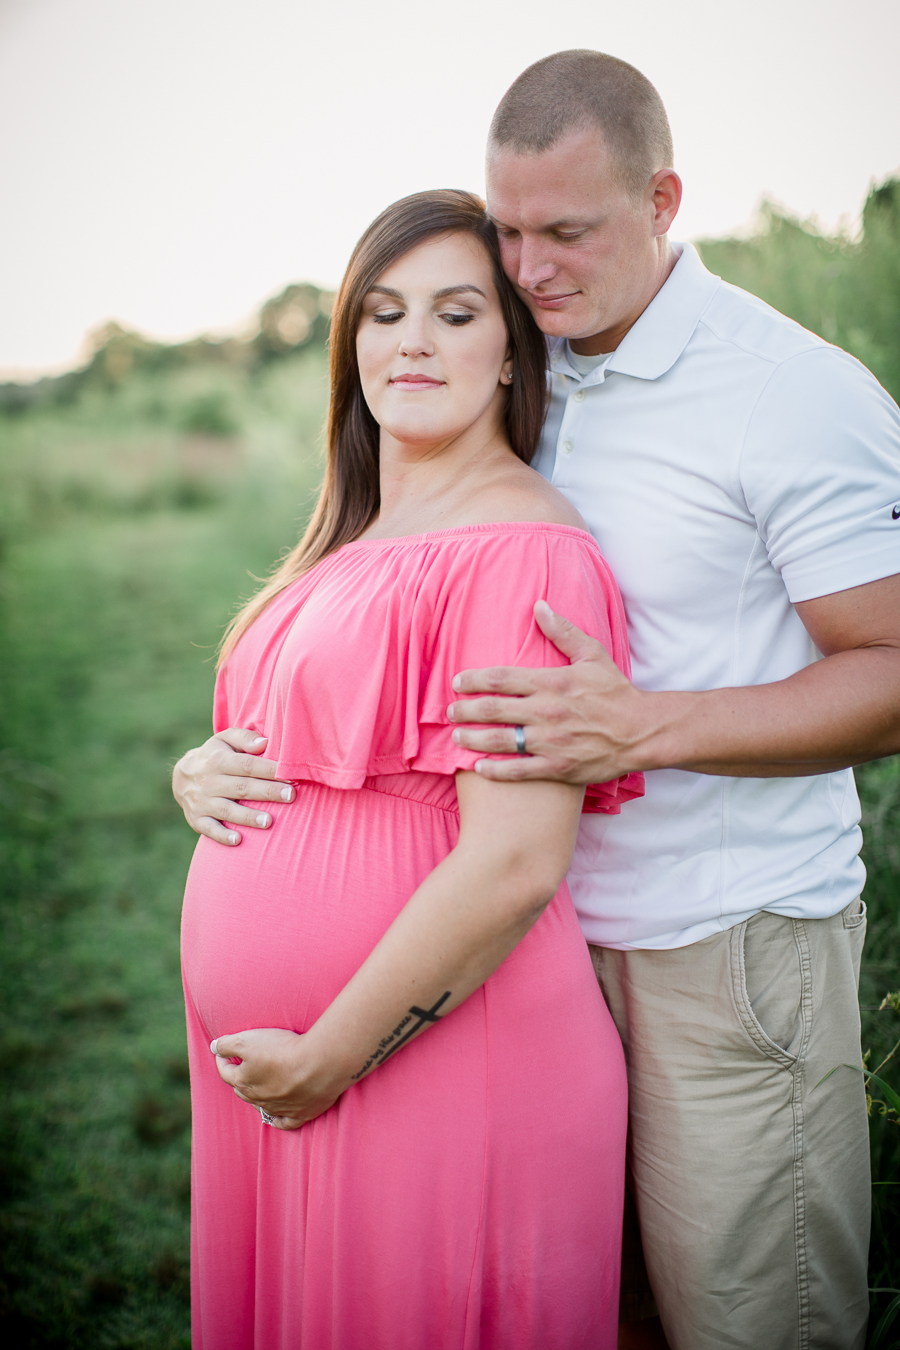 His hand on her arm at this Sterchi Hills maternity session by Knoxville Wedding Photographer, Amanda May Photos.